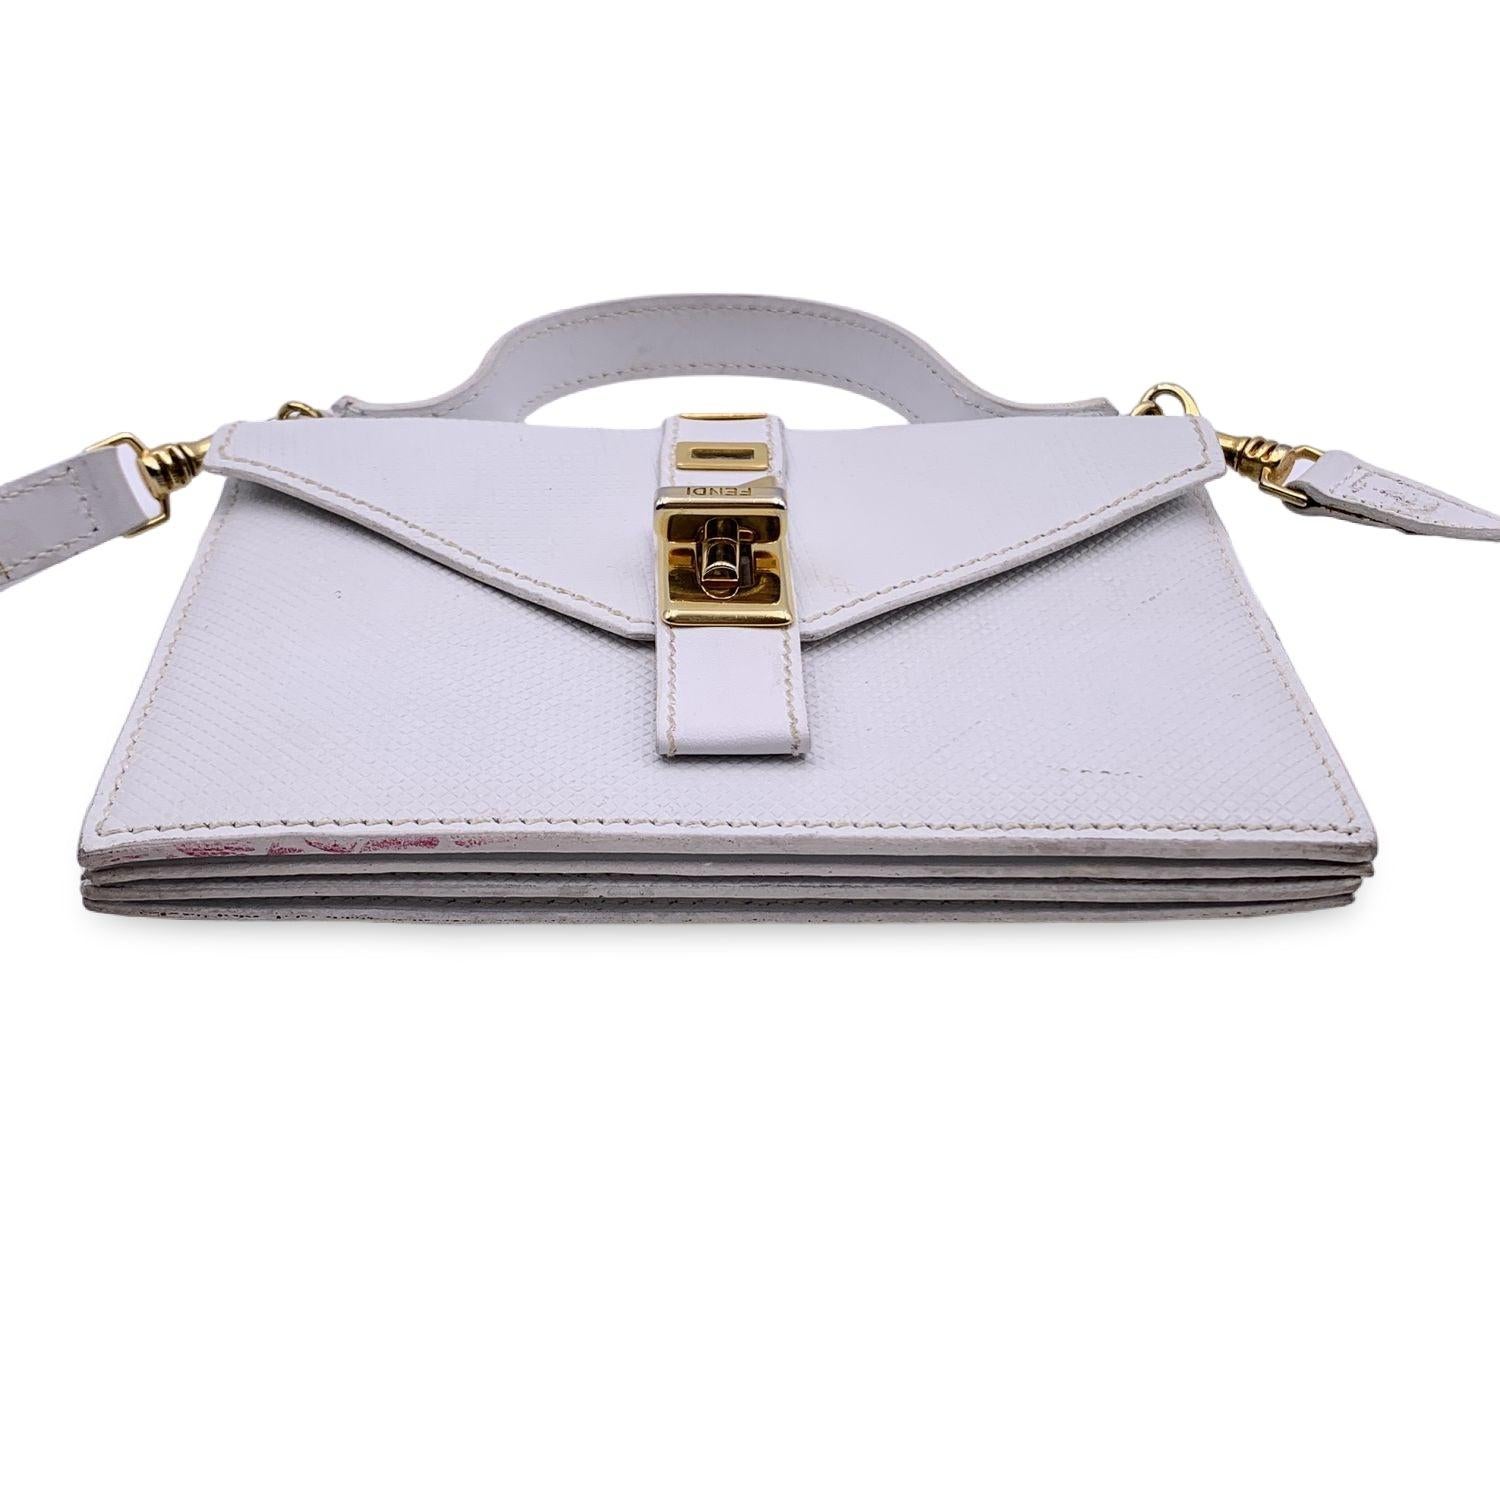 Fendi Vintage White Leather Textured Convertible Mini Handbag In Good Condition For Sale In Rome, Rome